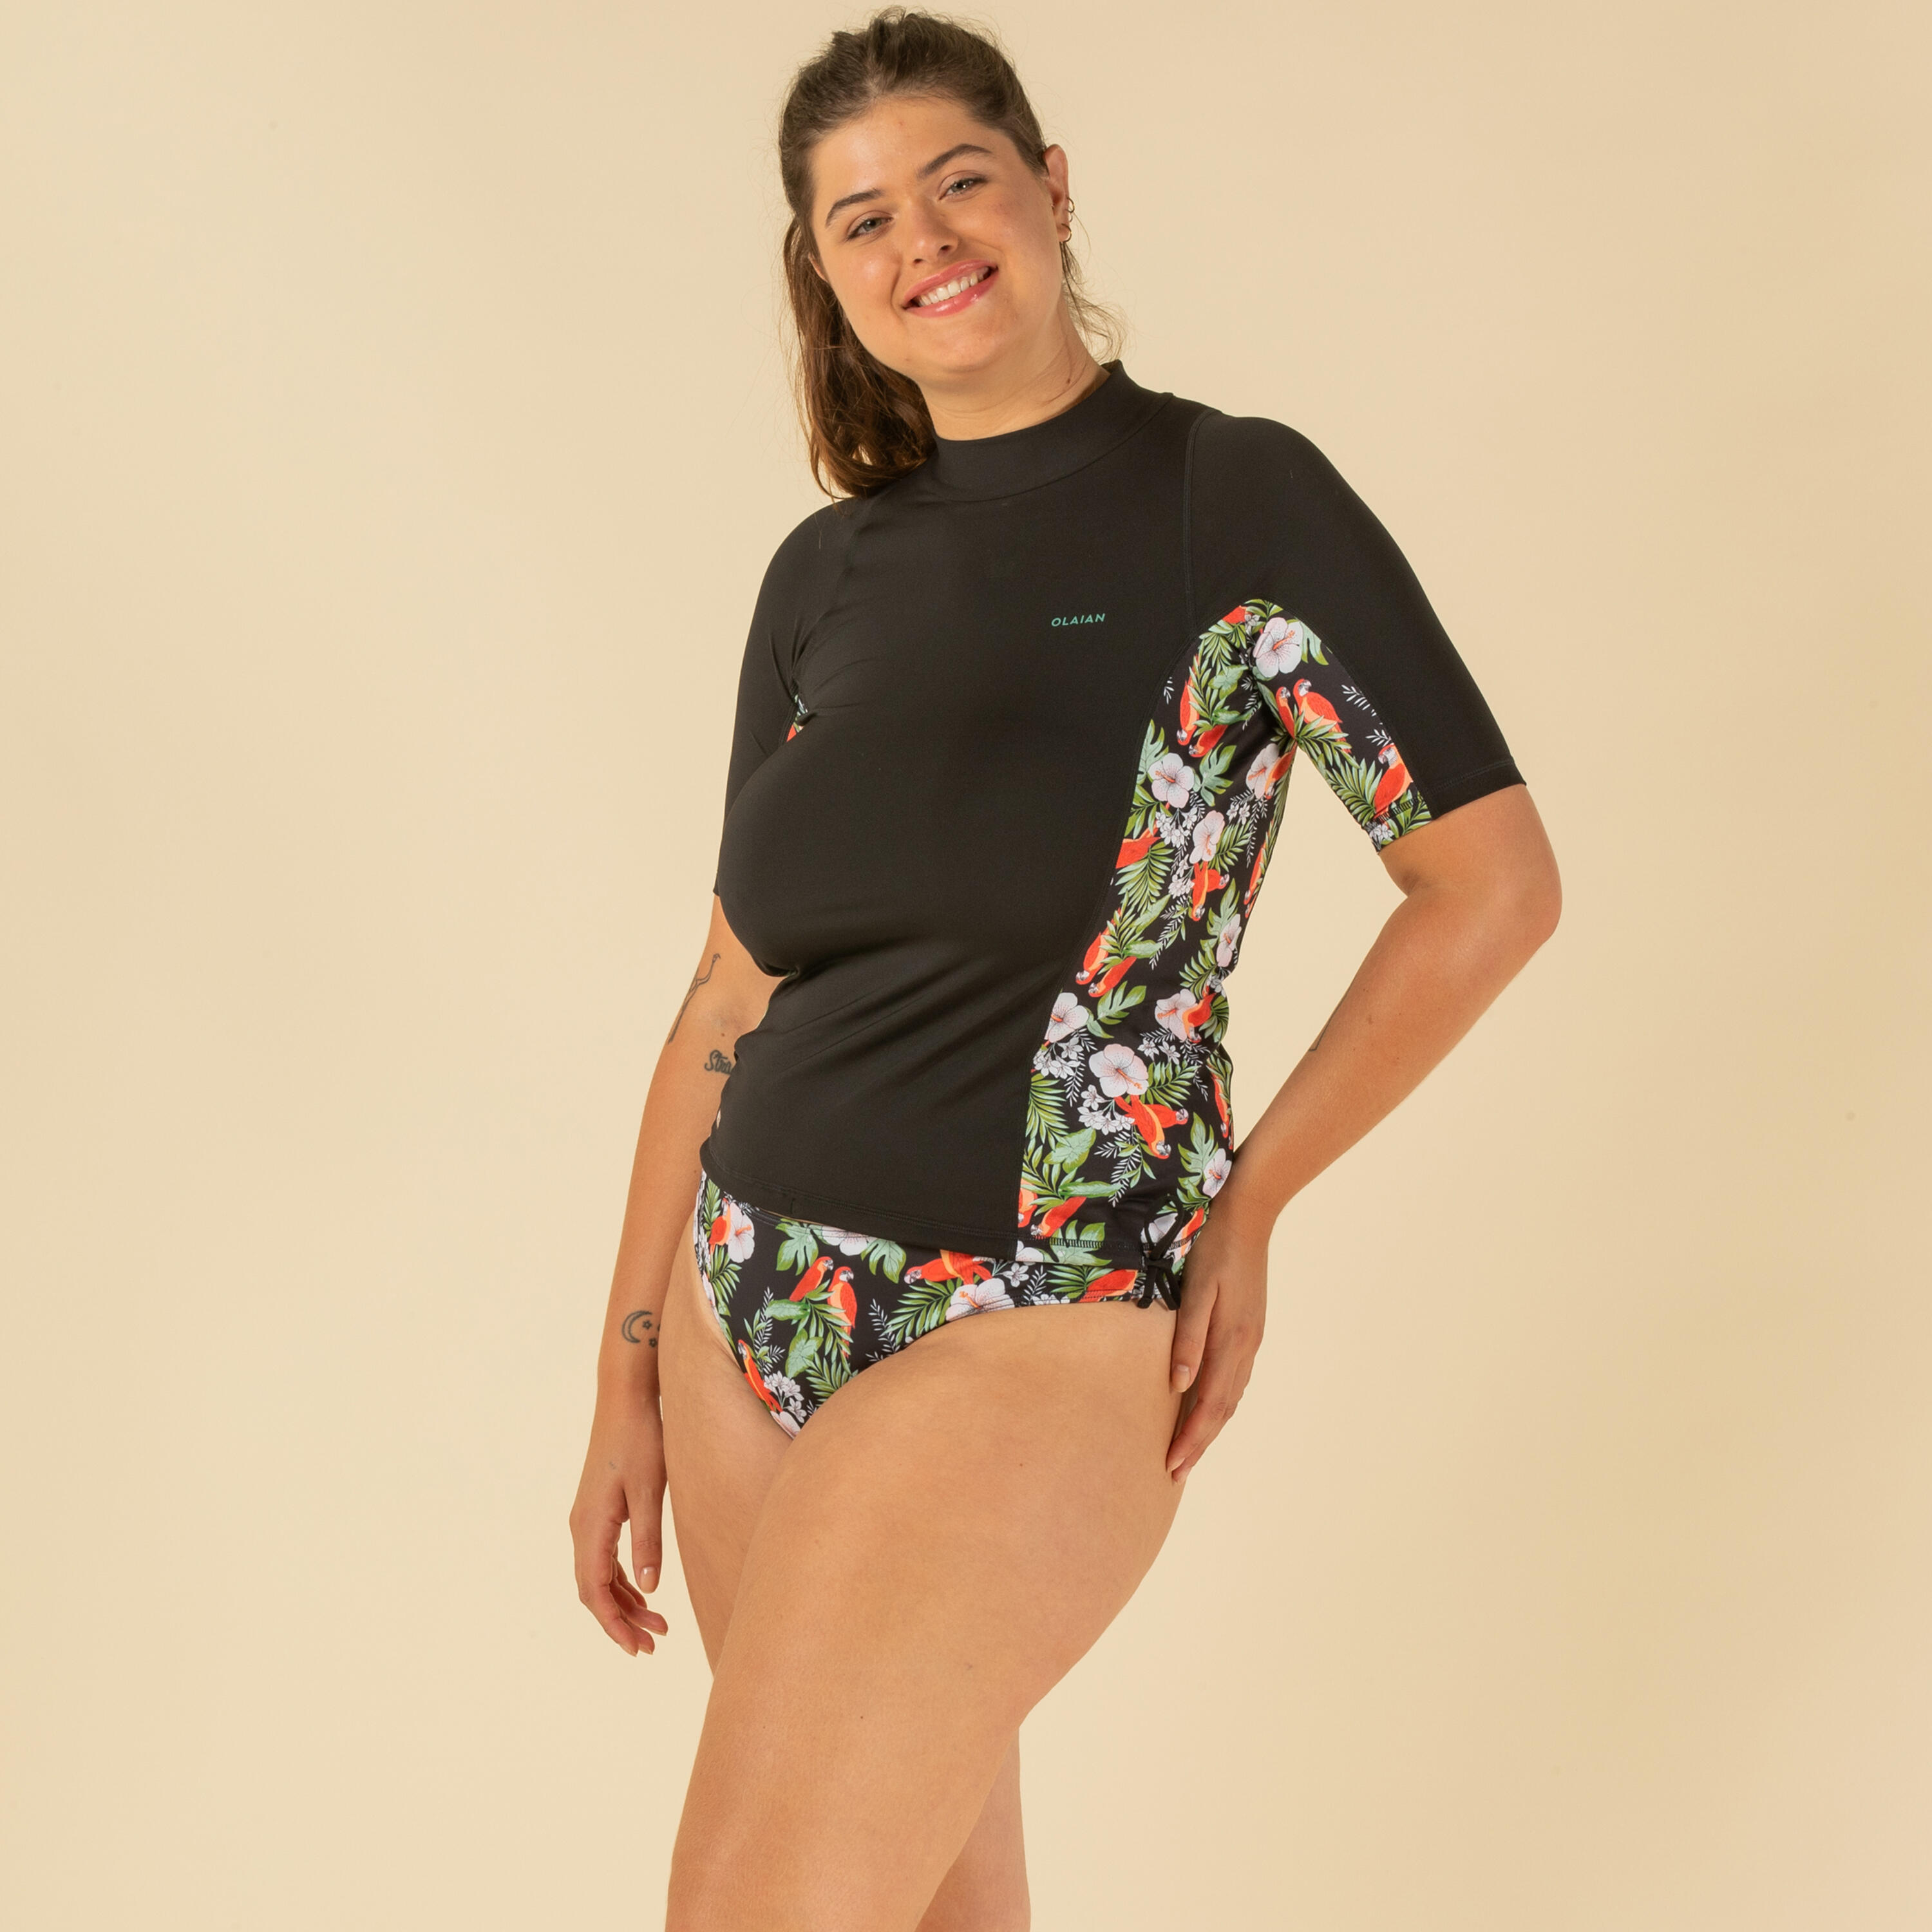 Women's UV-protective short sleeve T-shirt surf top 500 black and floral PARROT 3/9